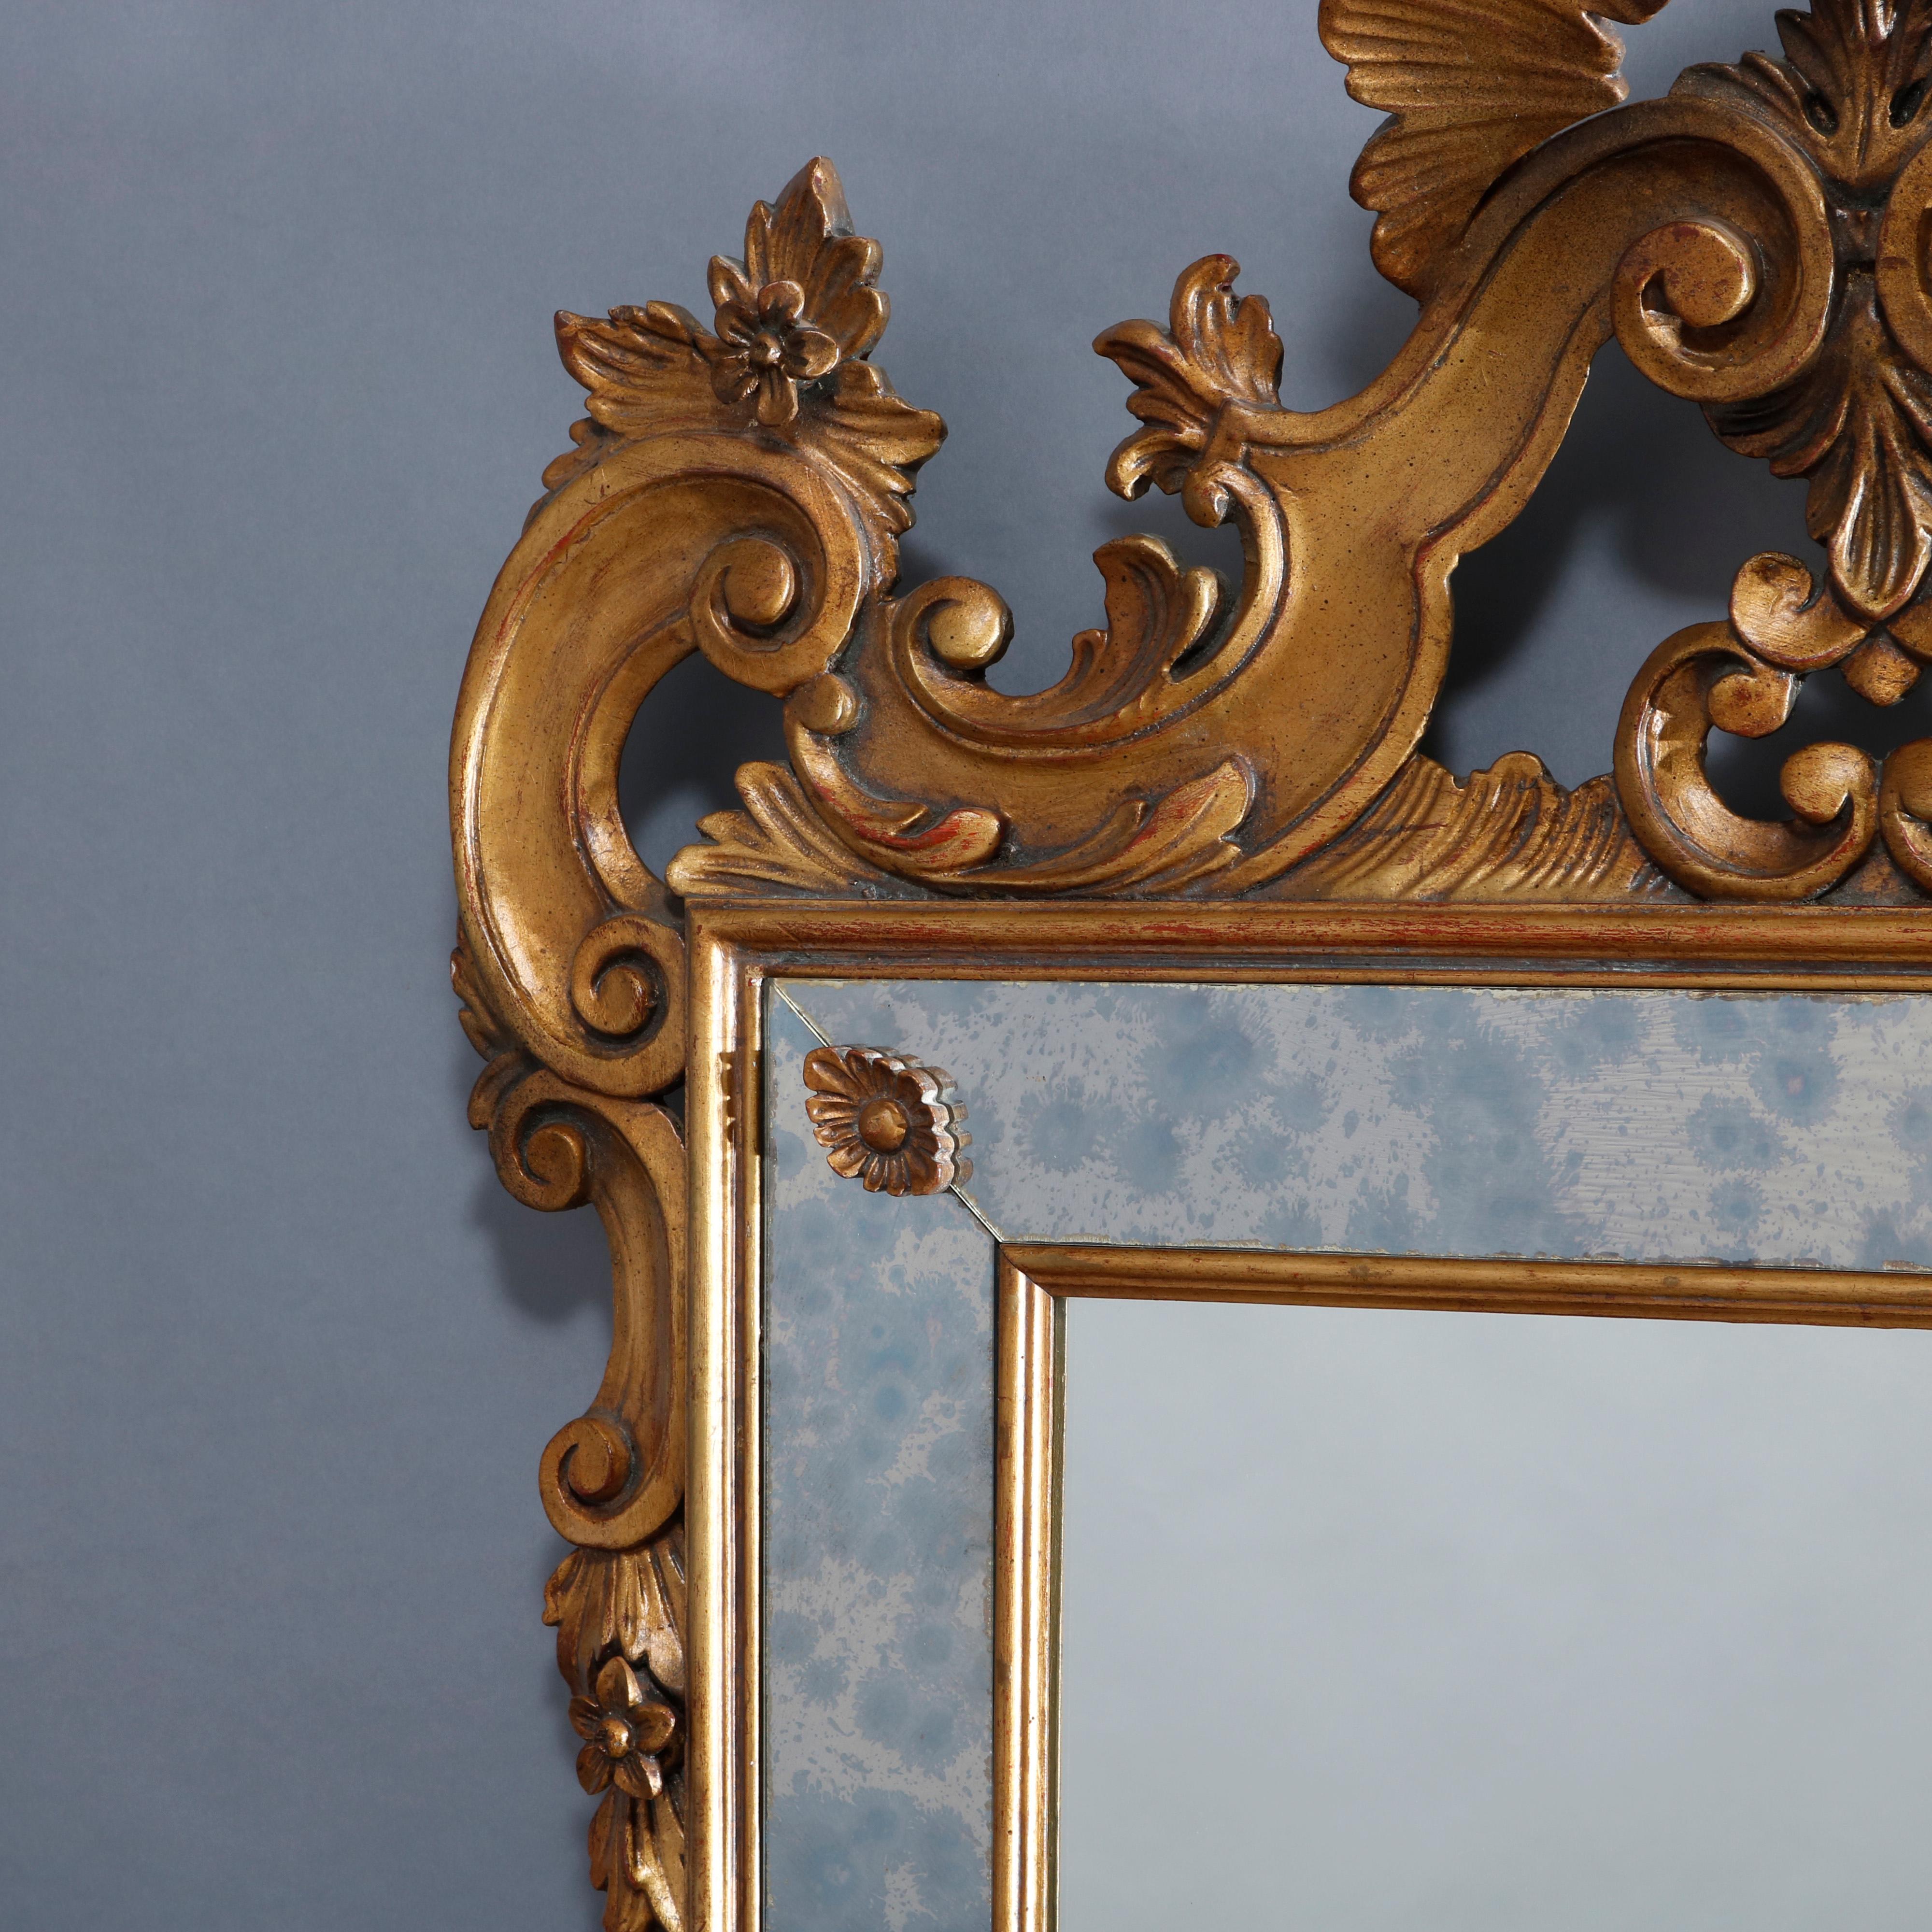 20th Century Vintage Italian Rococo Style Giltwood Parclose Over Mantel Mirror by Karges